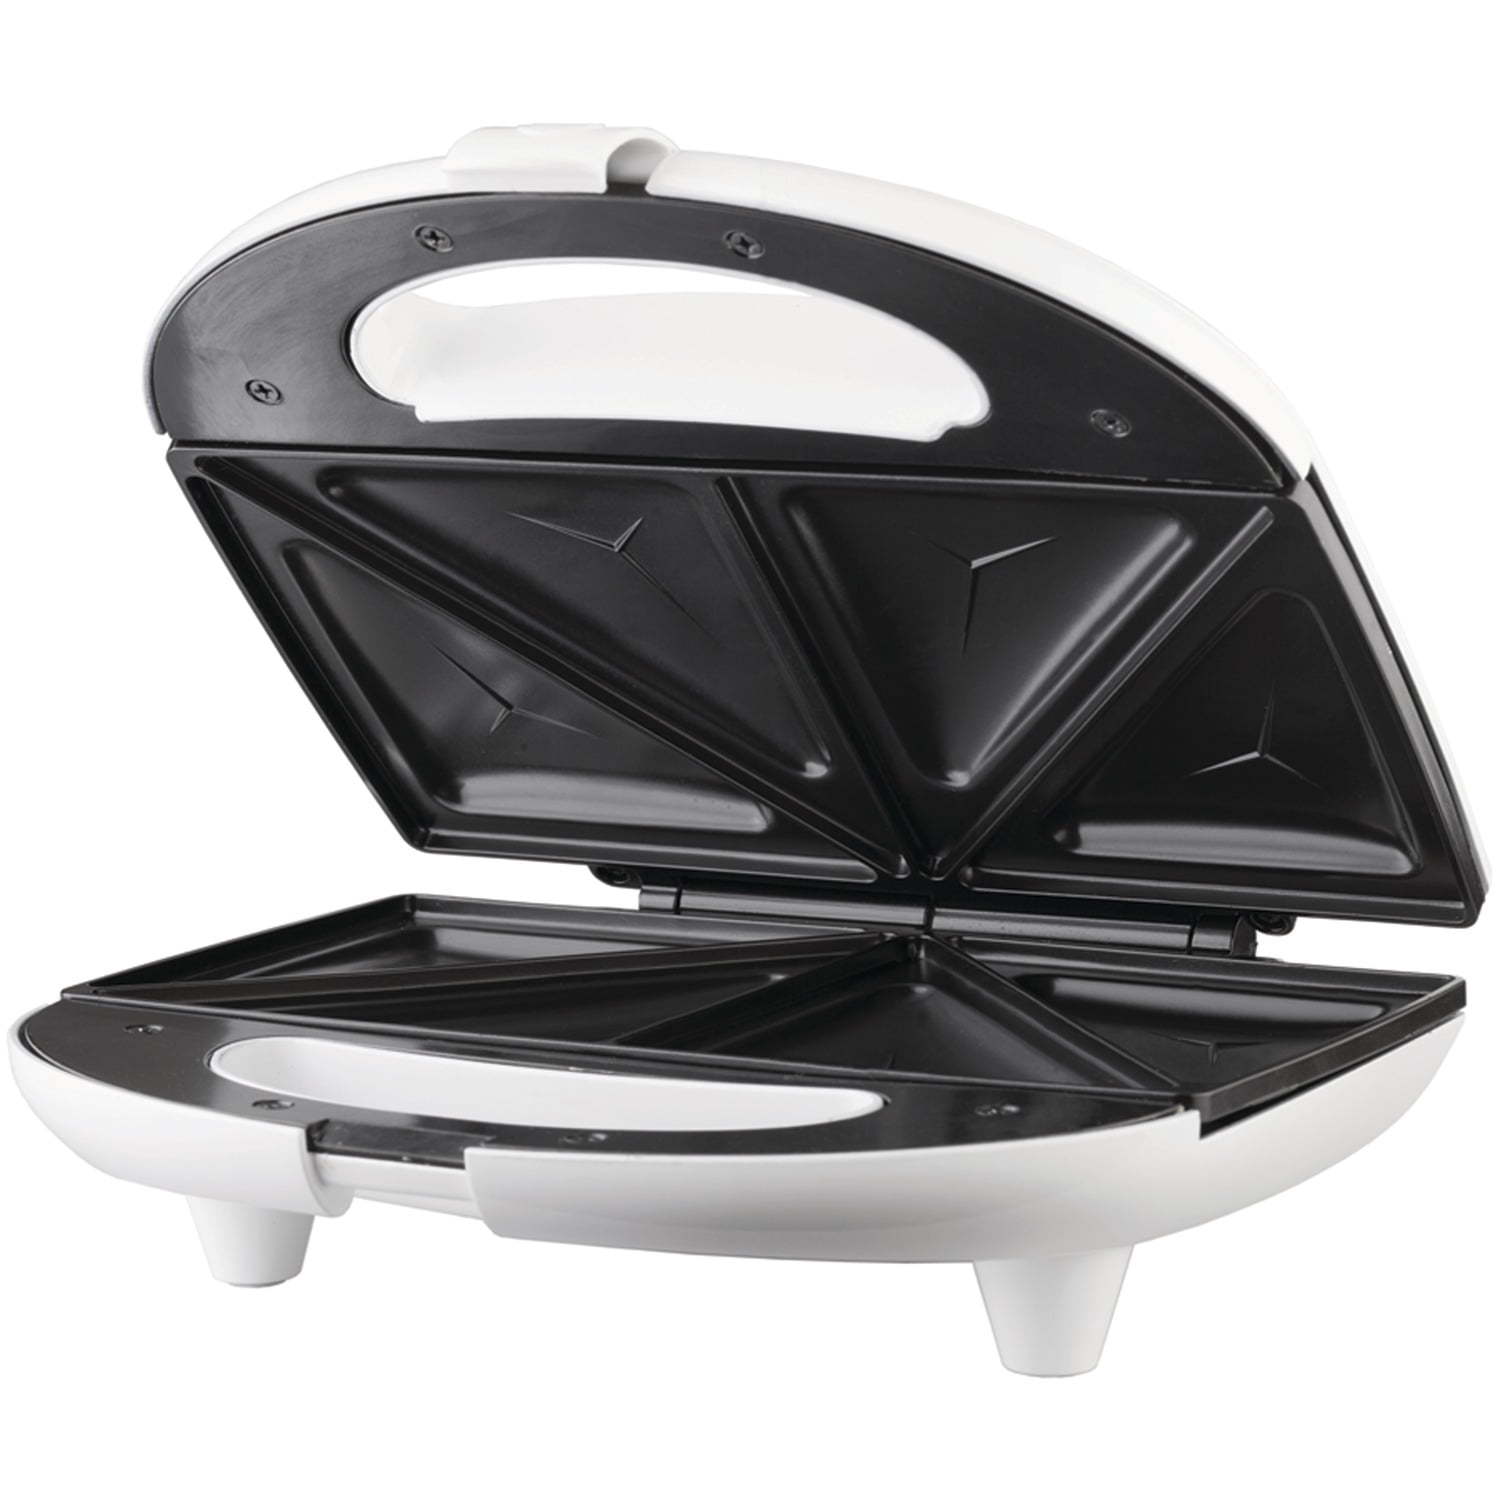 Black & Decker 220 volts Sandwich Maker with Grill and Waffle Maker  TS2090/2130-B5 750/780 Watts 3 in 1 220V 240 Volts 50 hz